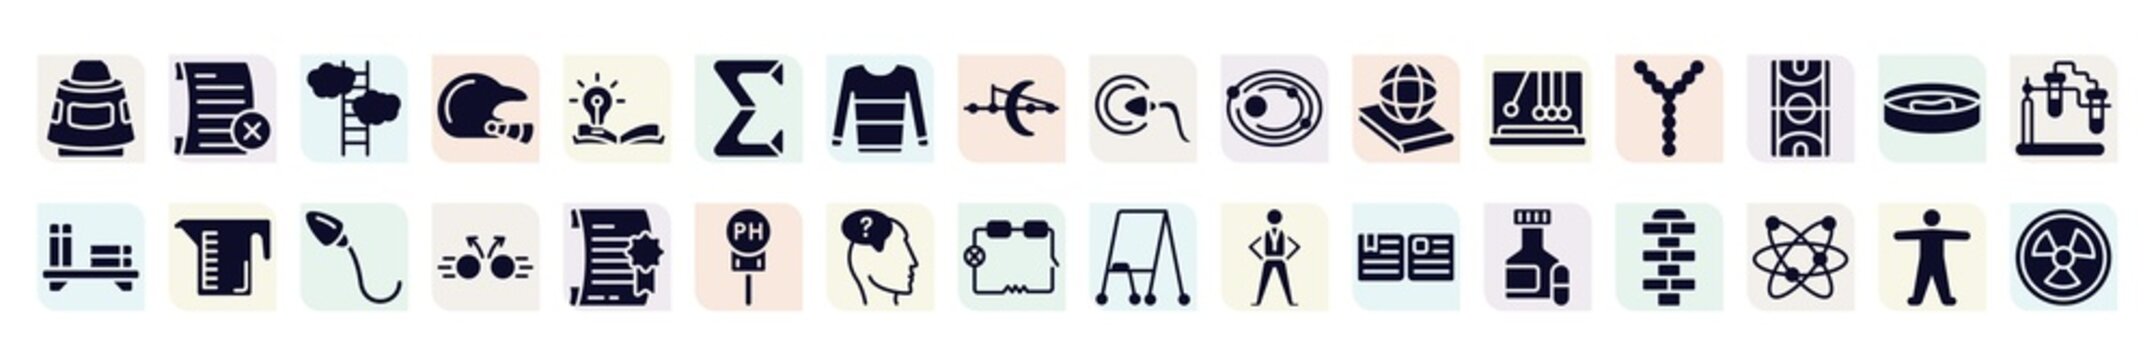 laboratory filled icons set. glyph icons such as space capsule, ascend, sigma, solar system, chromosome, measure cup, collision, doubt, pill jar icon.